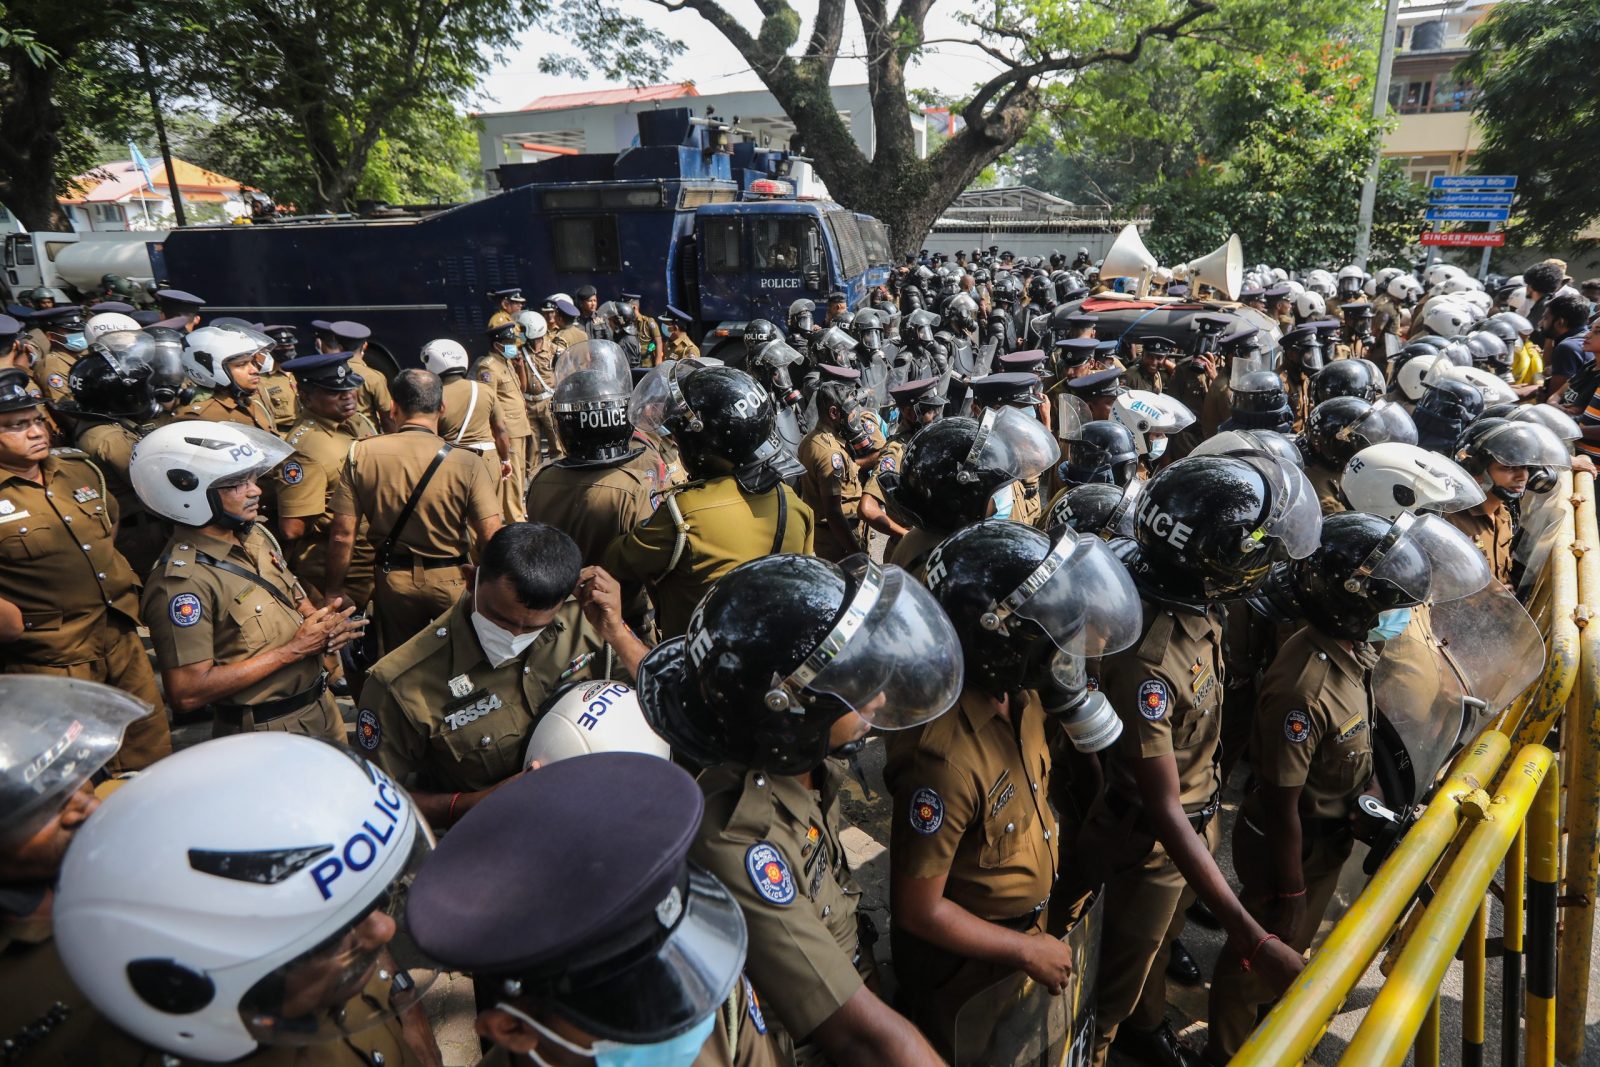 epa10312751 Sri Lankan riot police try to disperse a protest march demanding the release of protesters who had been detained under the Preventive Terrorism Act (PTA) in front of the United Nations compound in Colombo, Sri Lanka, 18 November 2022. Thousands of protesters staged a protest march to the United Nations compound in Colombo, demanding the release of protesters who had been detained under the Preventive Terrorism Act (PTA) for 90 days and against the government's crackdown on anti-government protesters using the PTA. Protests have been rocking Sri Lanka for over seven months as the country faces its worst-ever economic crisis in decades due to the lack of foreign reserves, resulting in severe shortages in food, fuel, medicine, and imported goods.  EPA/CHAMILA KARUNARATHNE